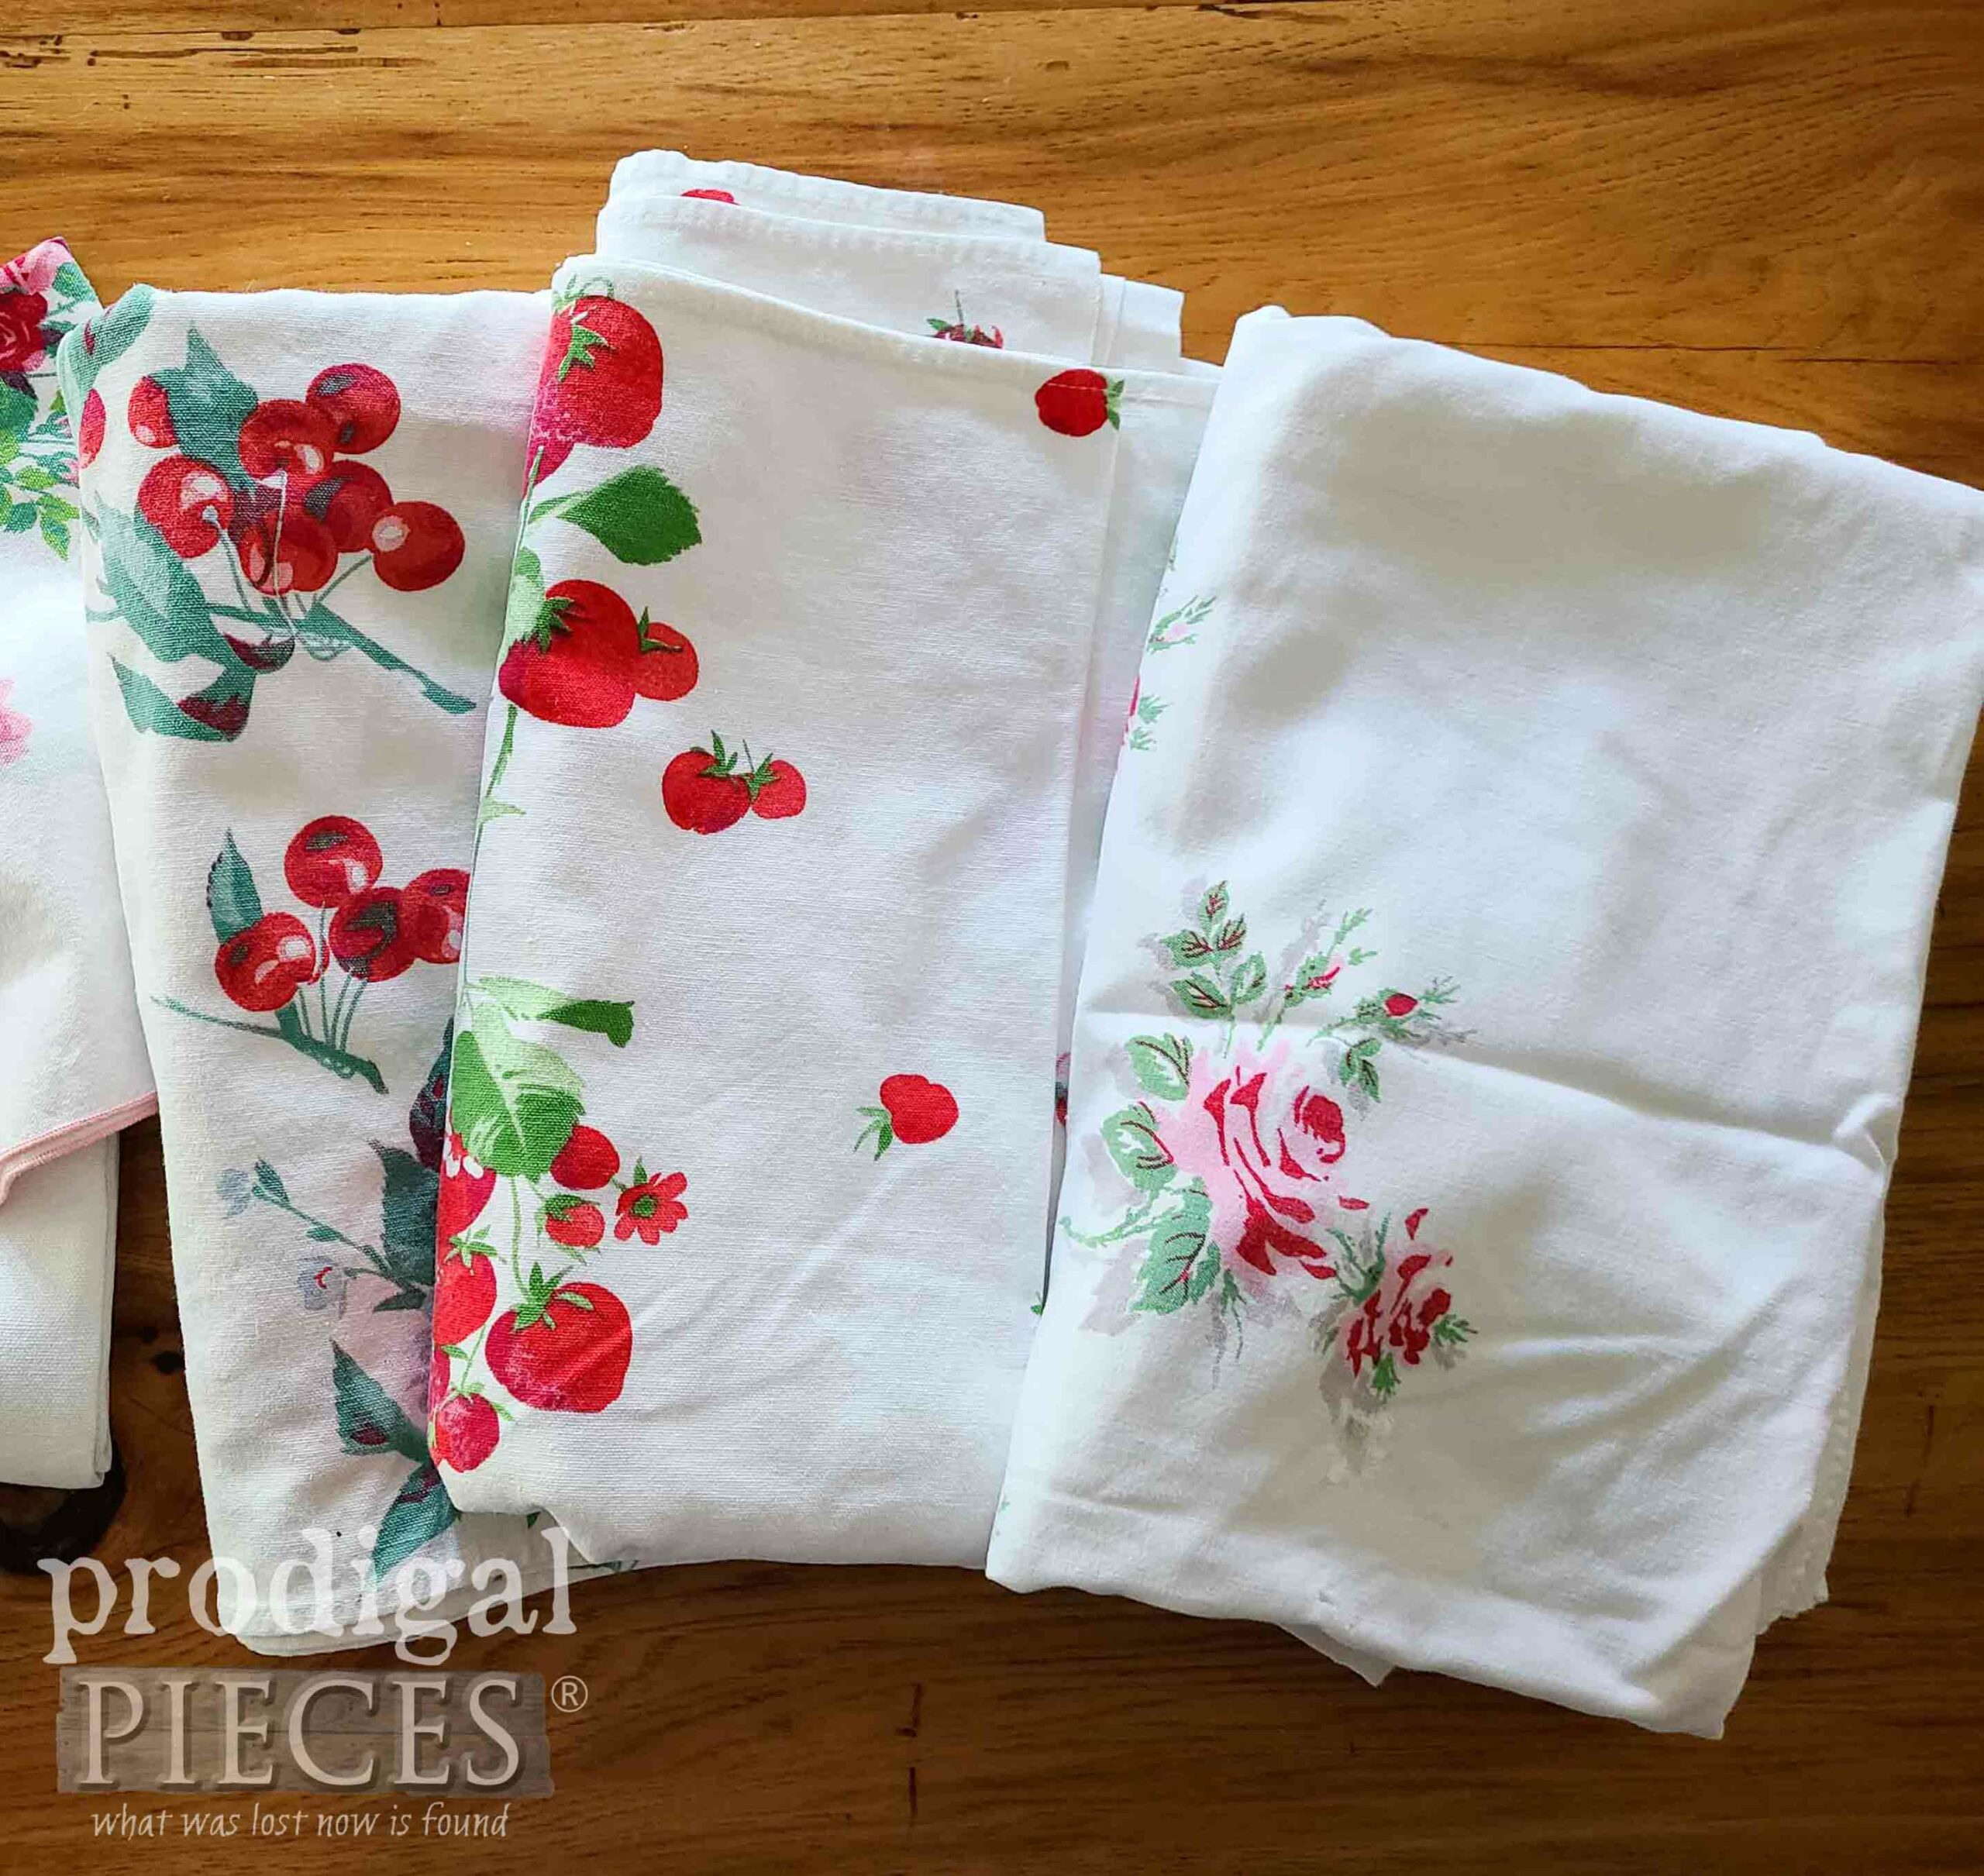 Vintage Tablecloths Before Being Refashioned by Larissa of Prodigal Pieces | prodigalpieces.com #prodigalpieces